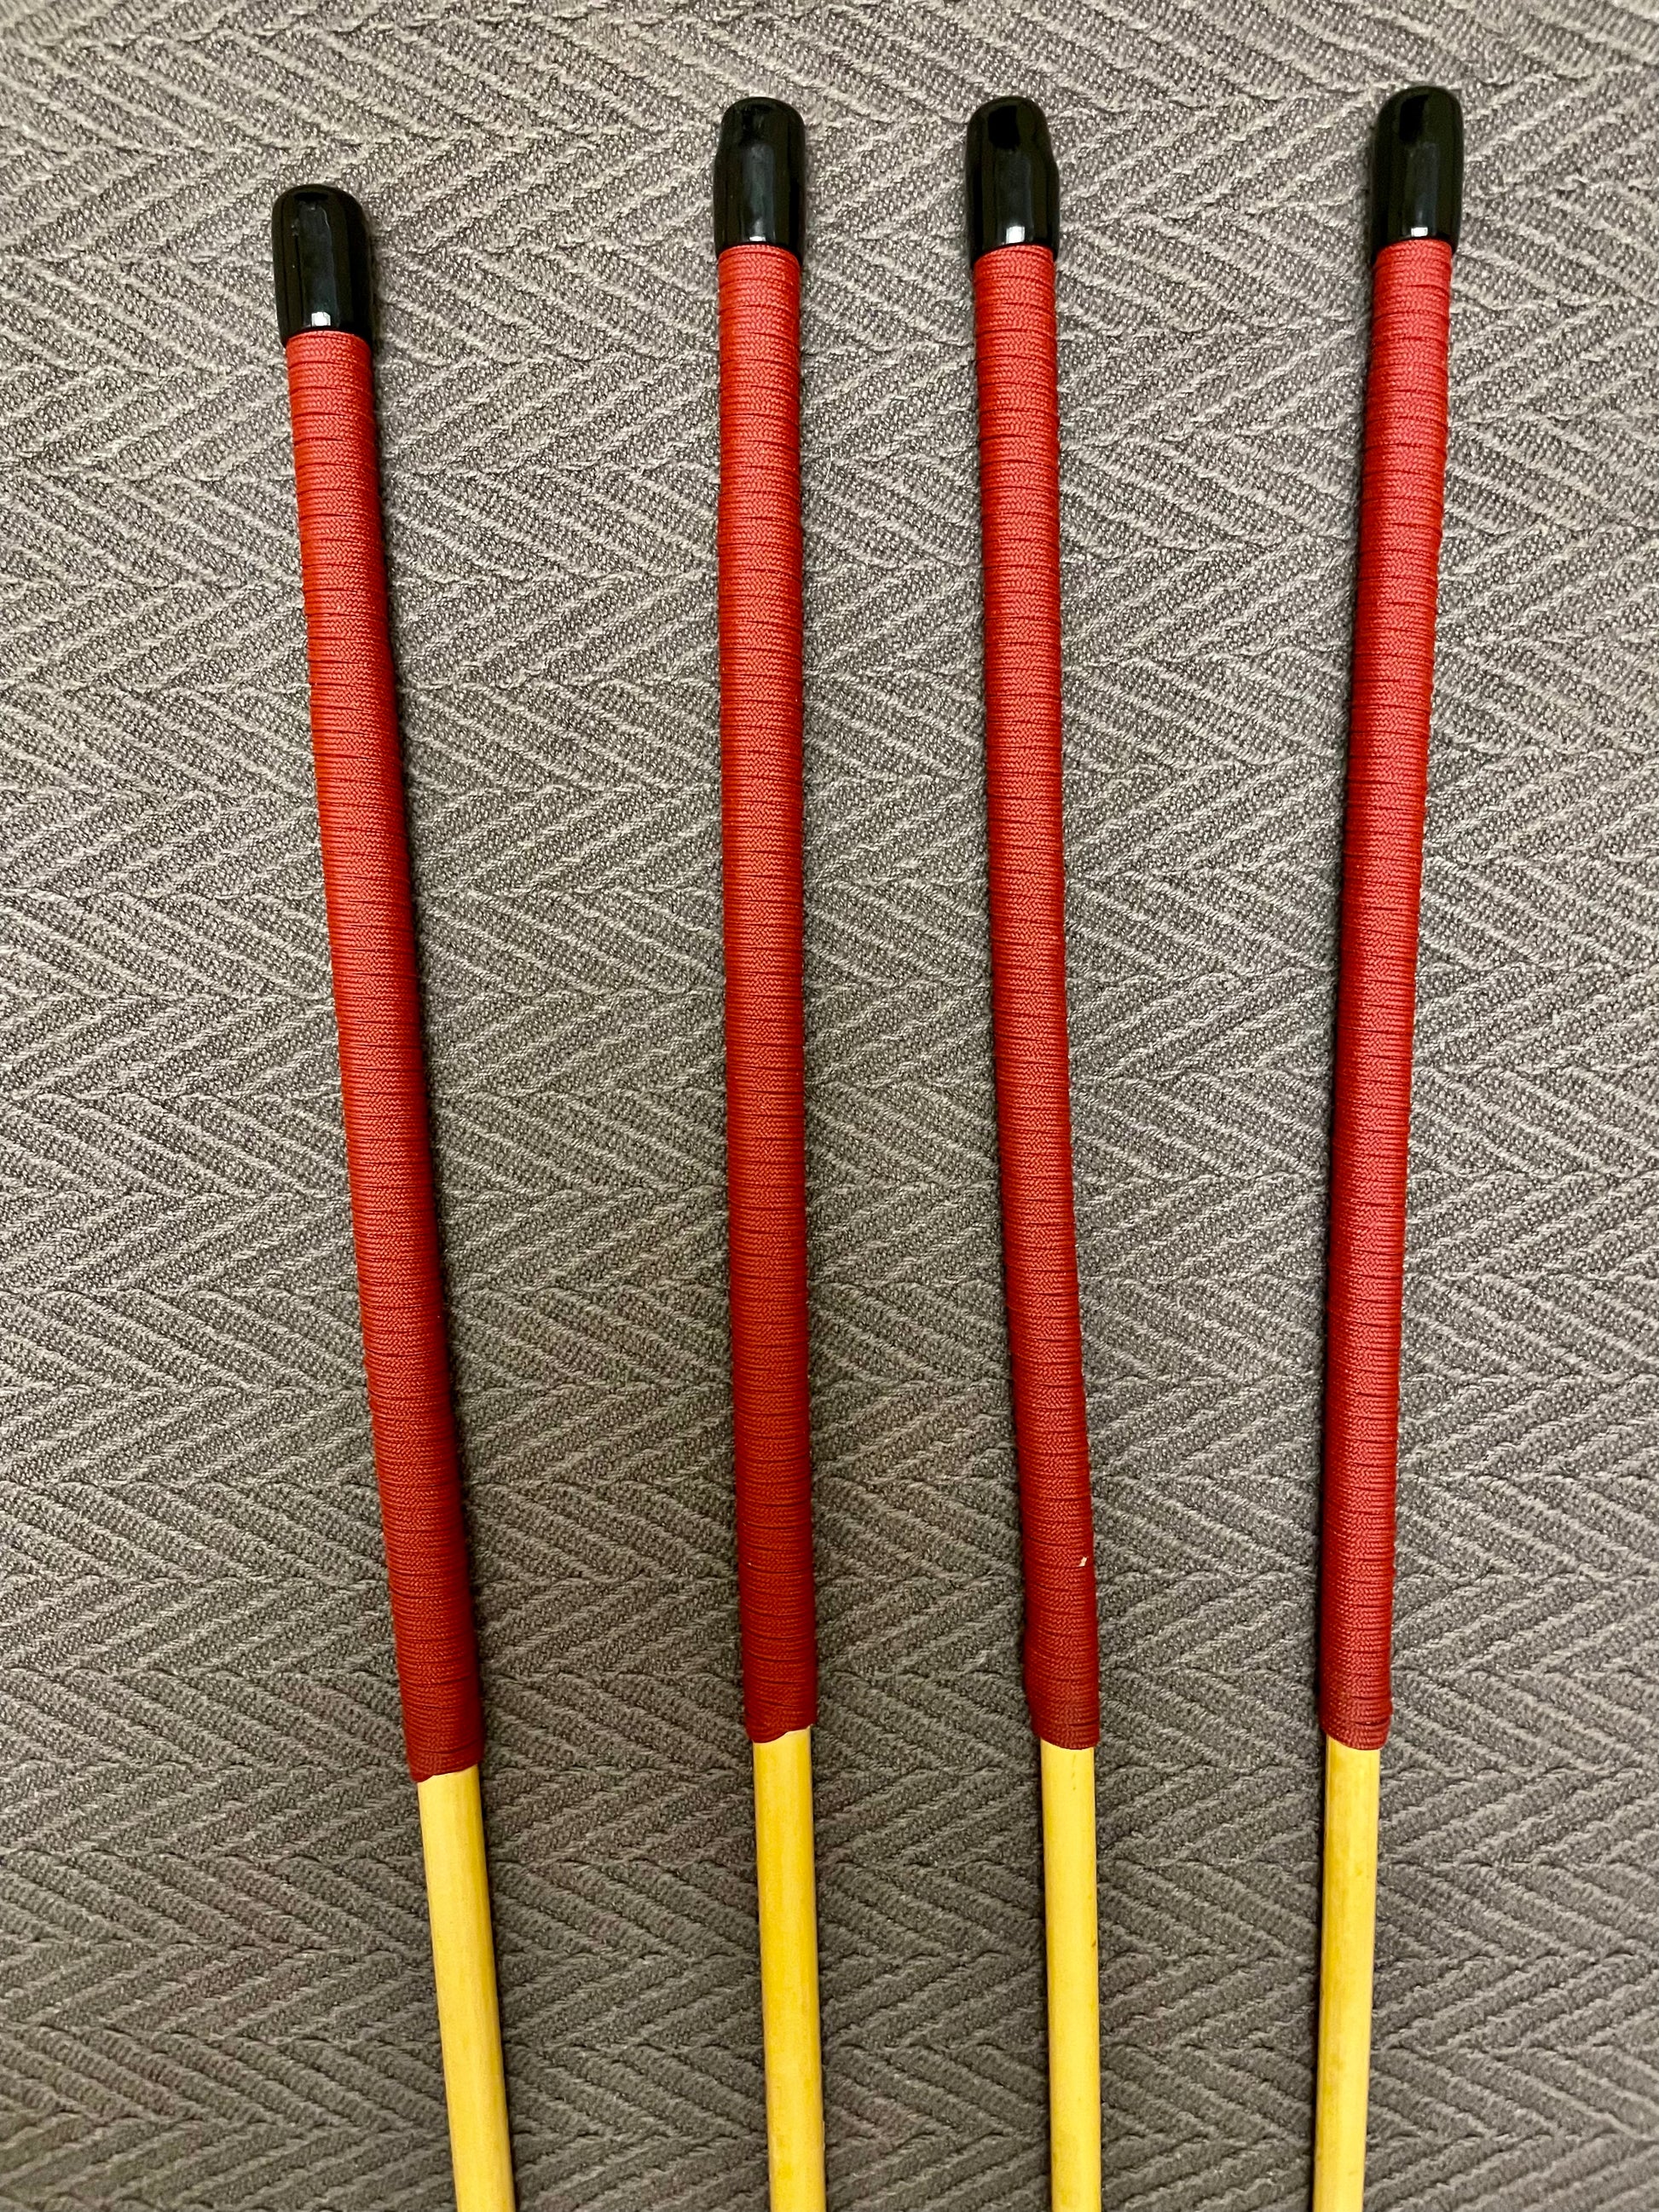 Thick and Thuddy Set of 4 Classsic Dragon Canes / Punishment Canes - 100 cms Length -RED Paracord Handles